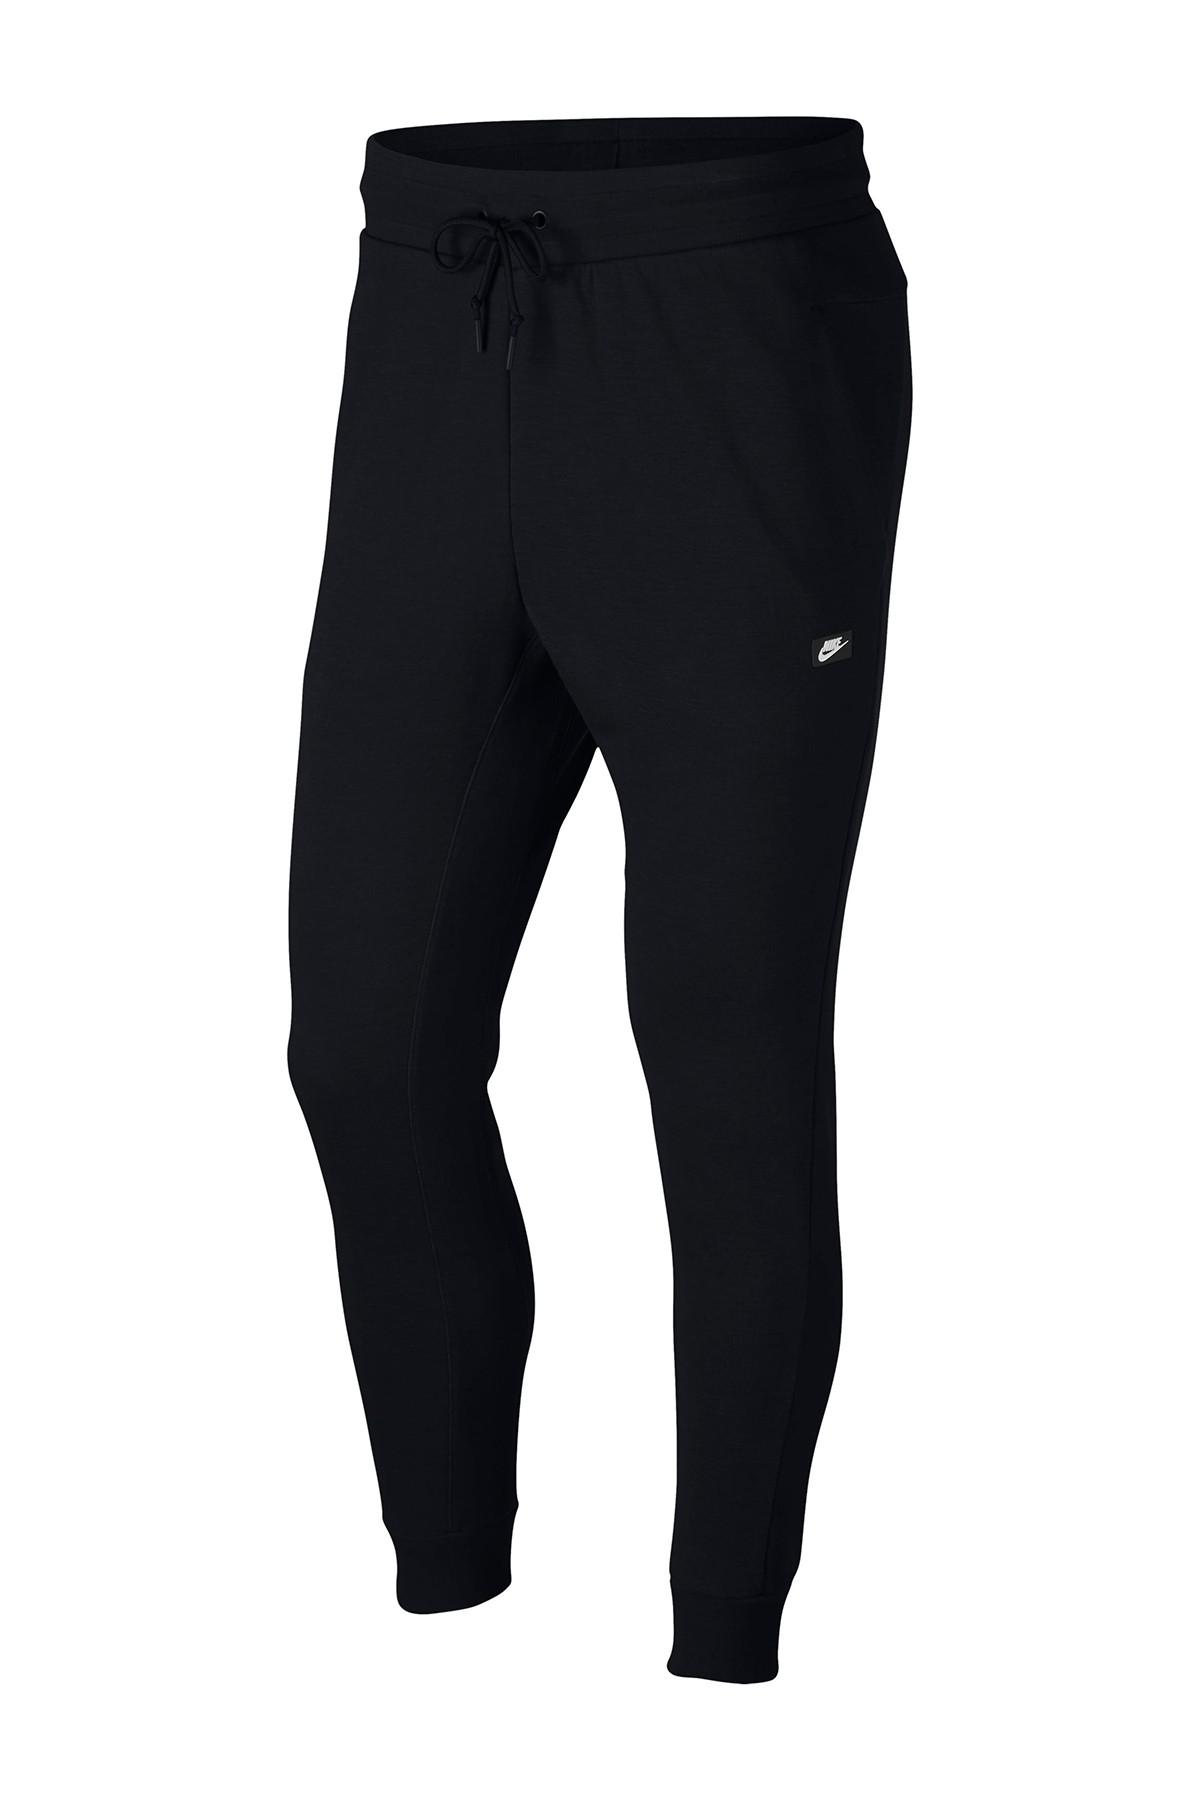 Nike Cotton Optic Joggers in Black for Men - Save 30% - Lyst